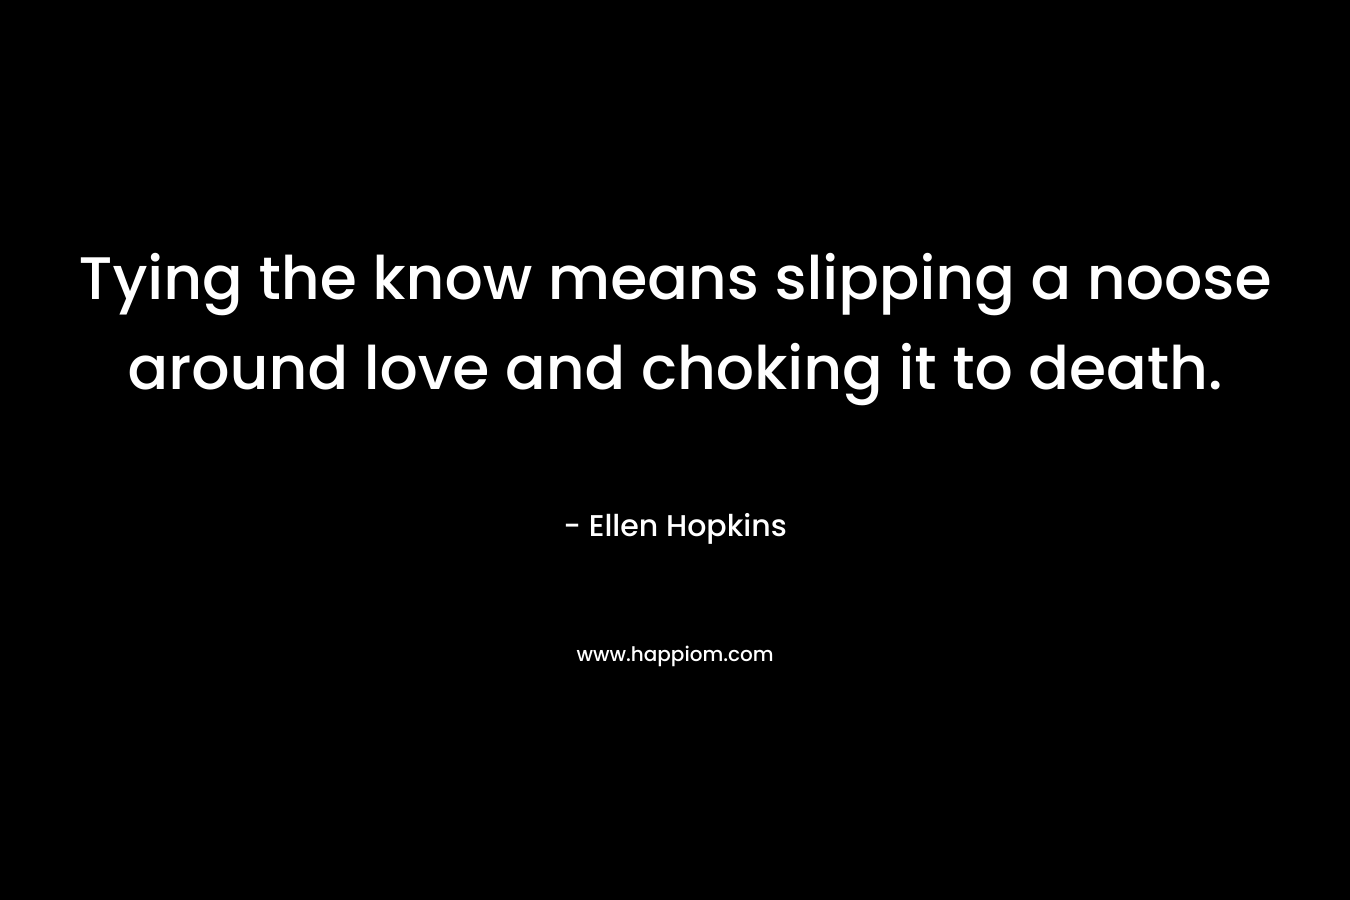 Tying the know means slipping a noose around love and choking it to death. – Ellen Hopkins